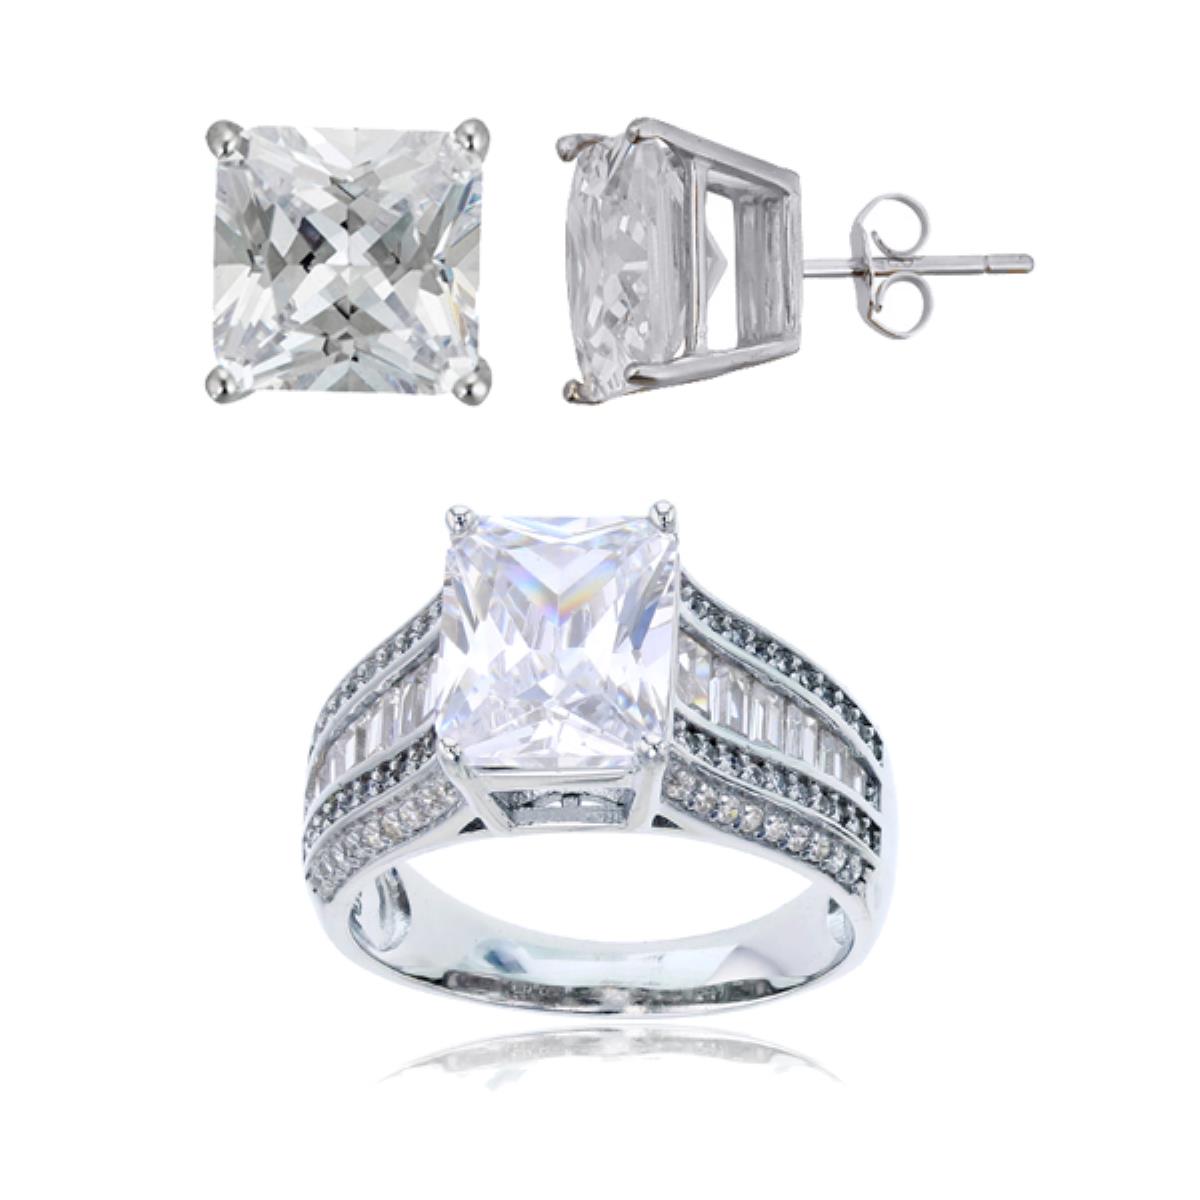 Sterling Silver Rhodium 8x10mm Radiant Cut Multi Sides CZ Ring & 8mm Square Solitaire Stud Set